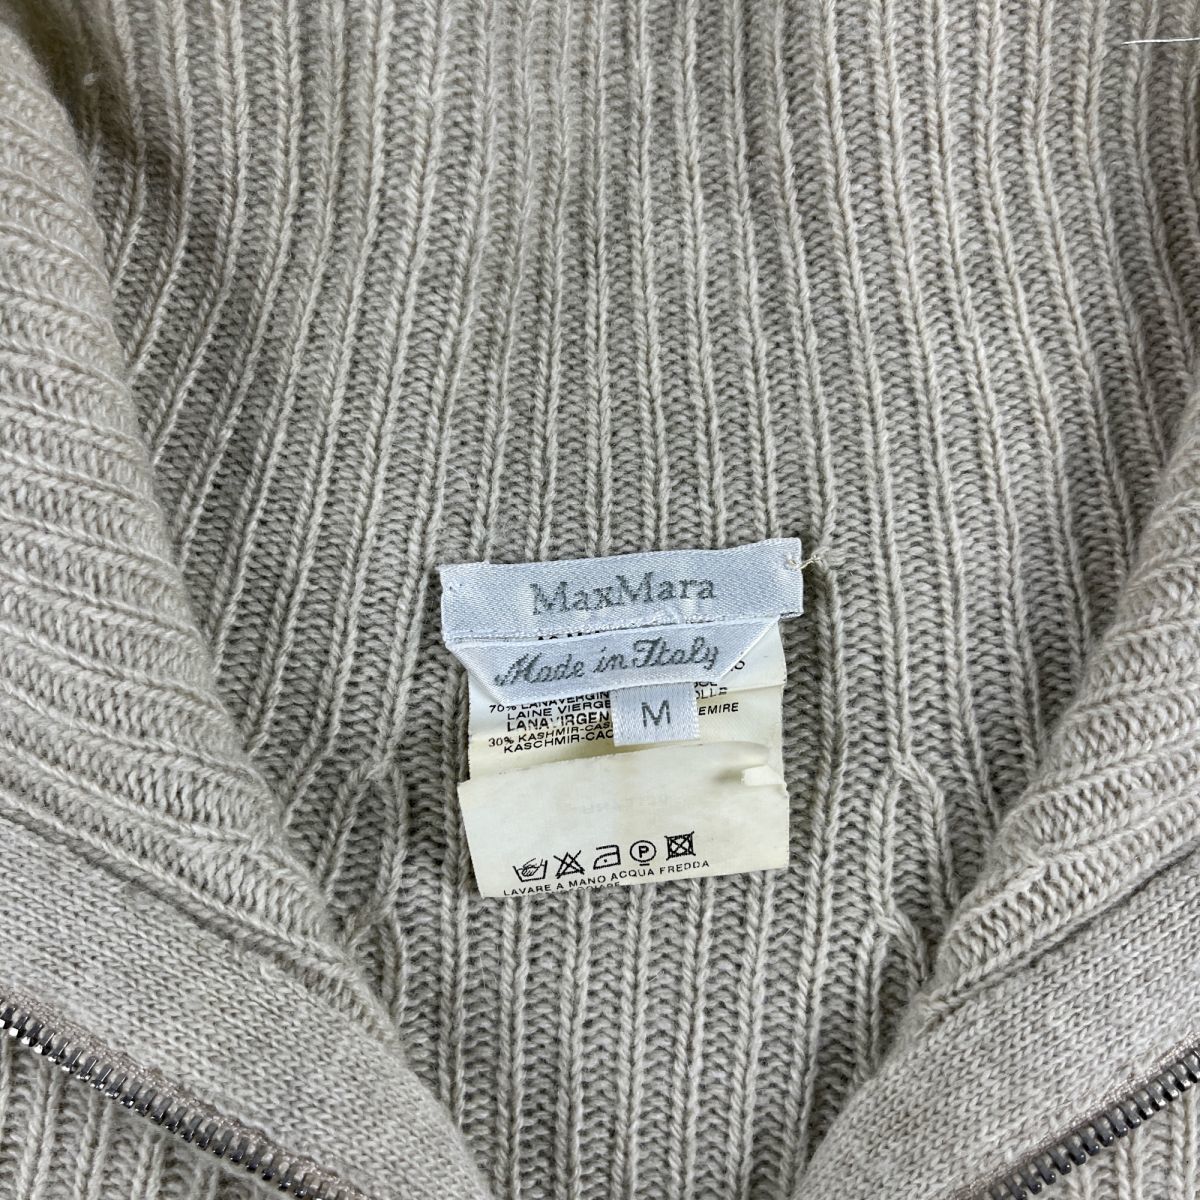 Max Mara Max Mara top class white tag wool * cashmere . double Zip rib knitted blouson tops lady's beige size M*KC910